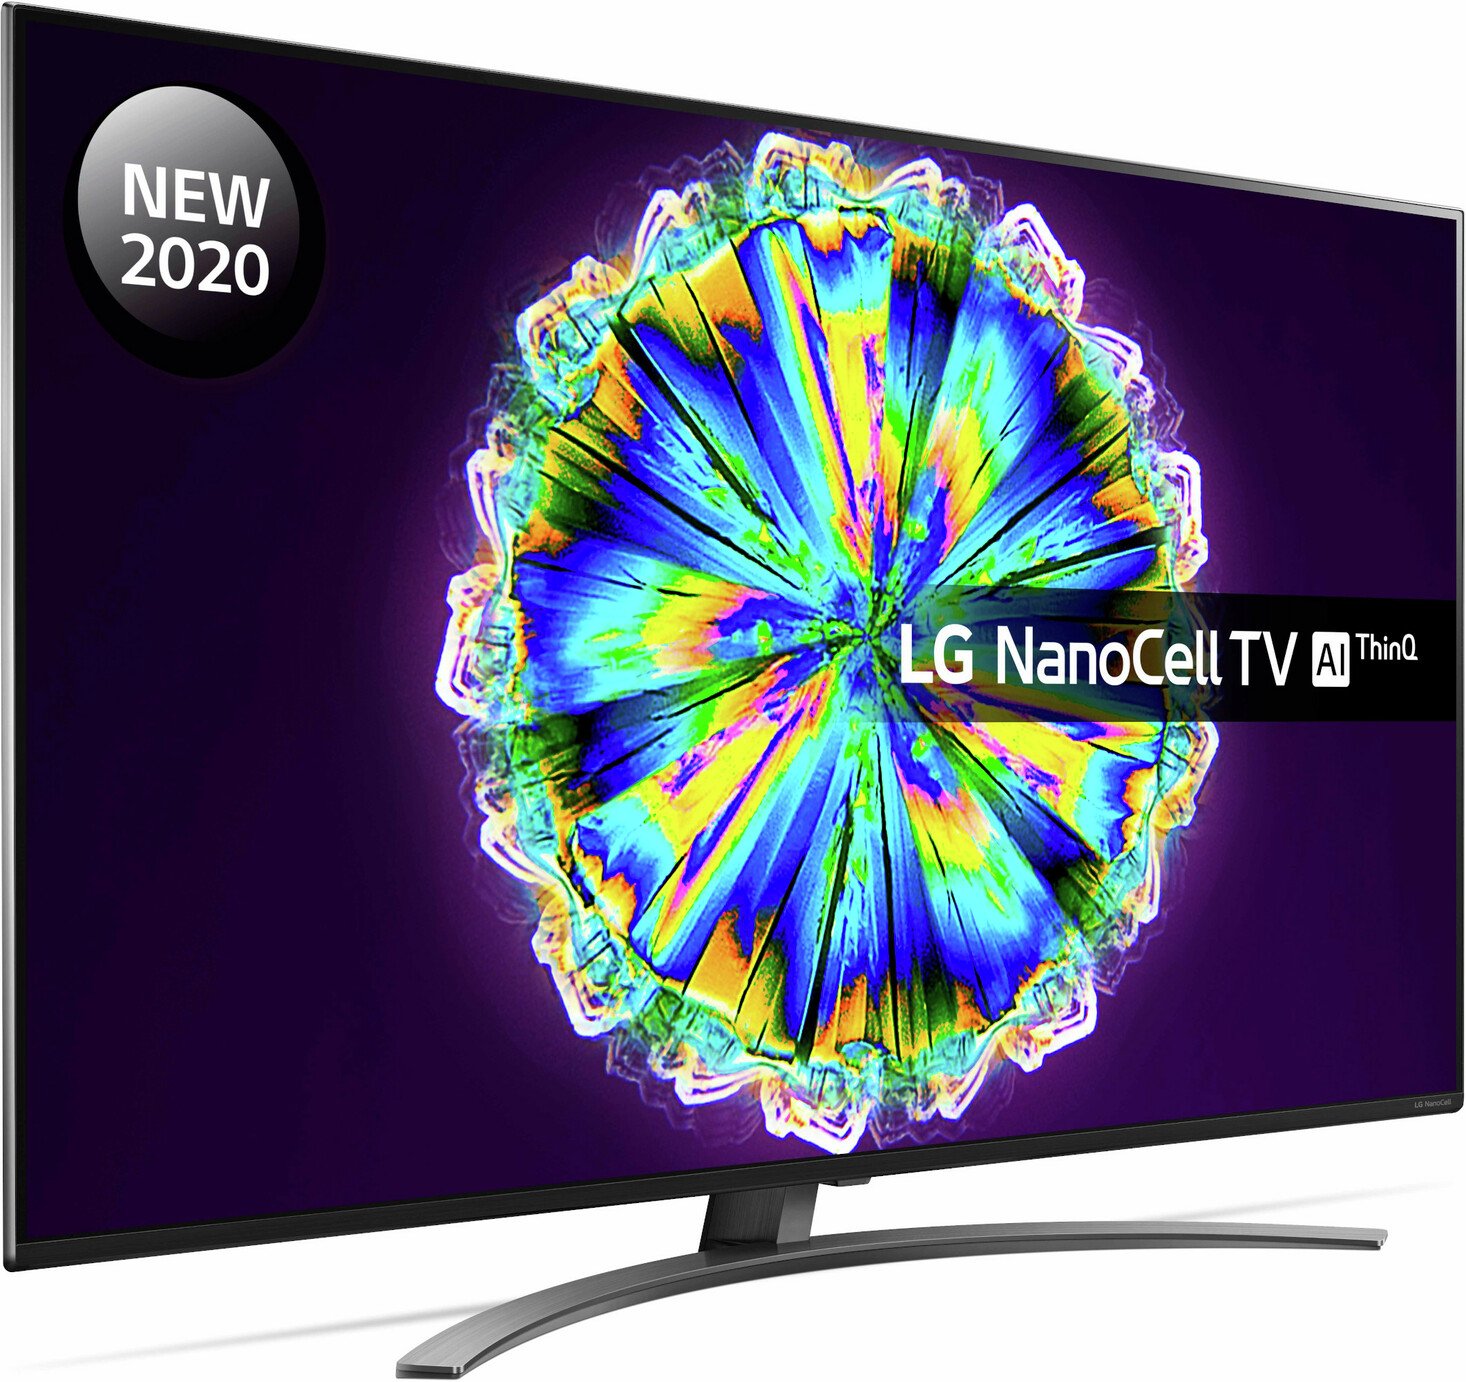 LG 55 Inch 55NANO86 Smart 4K Ultra HD LED TV with HDR Review